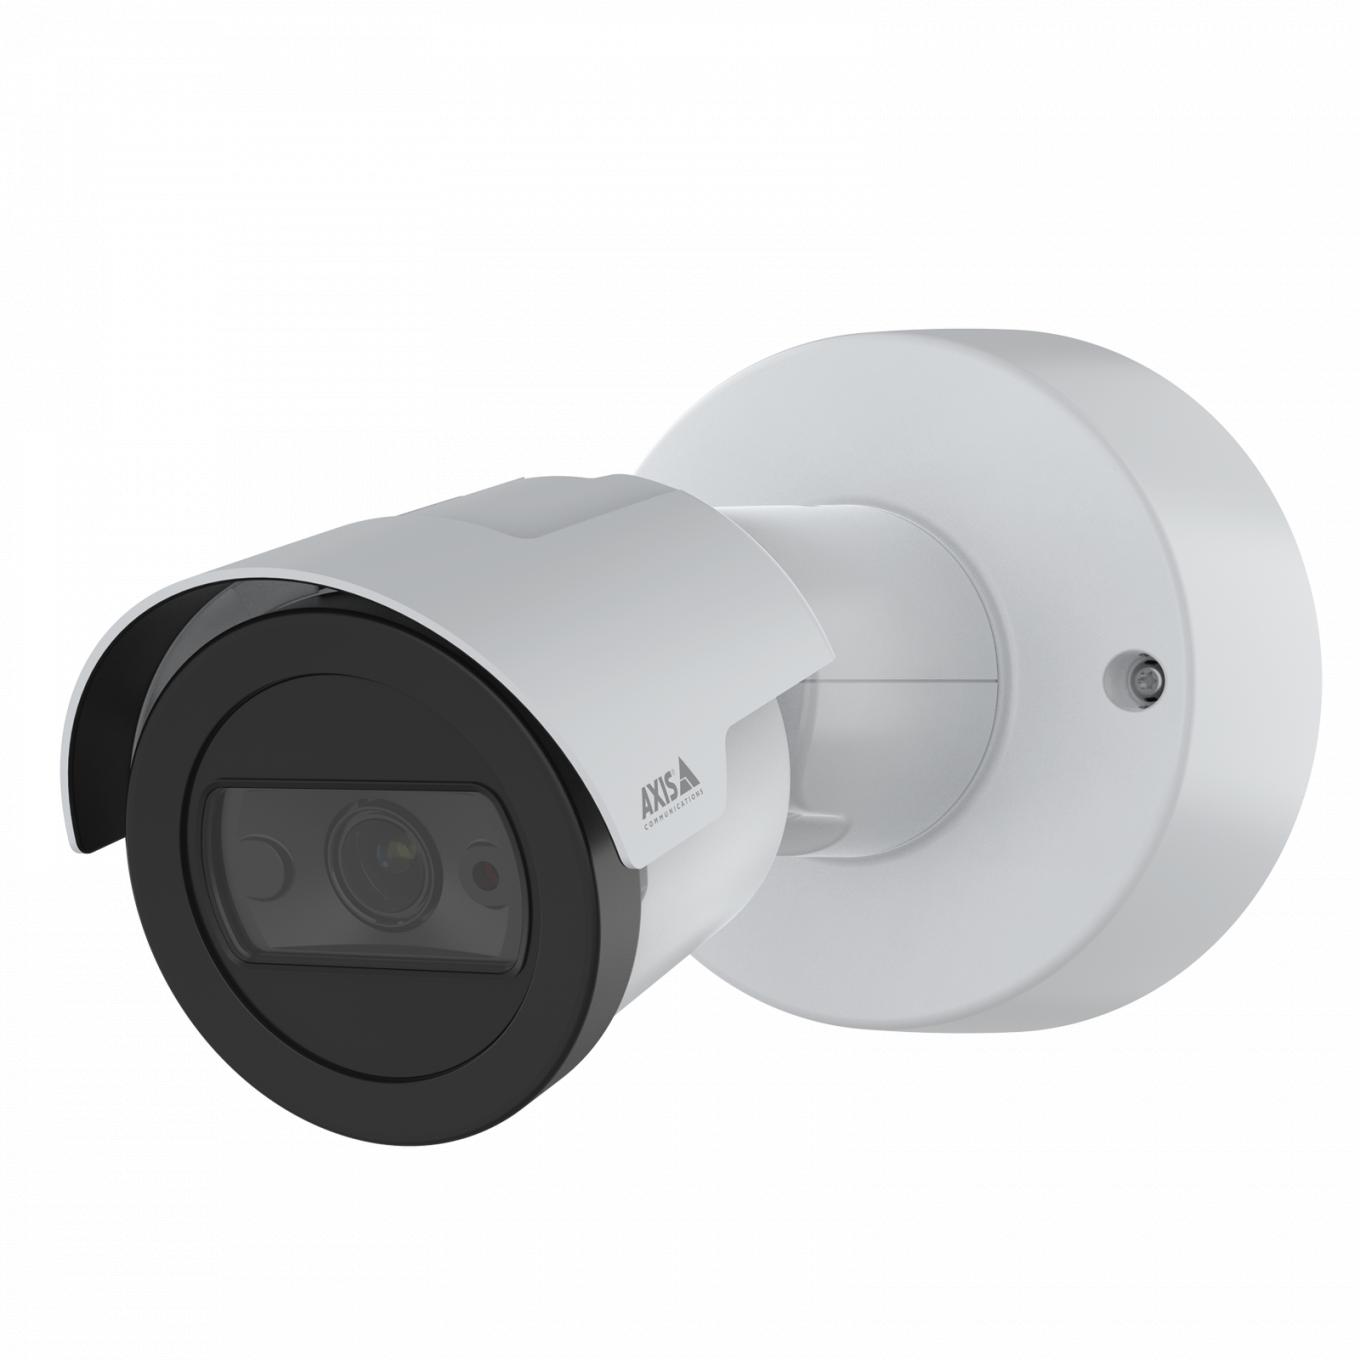 AXIS M2035-LE bullet camera white from left angle